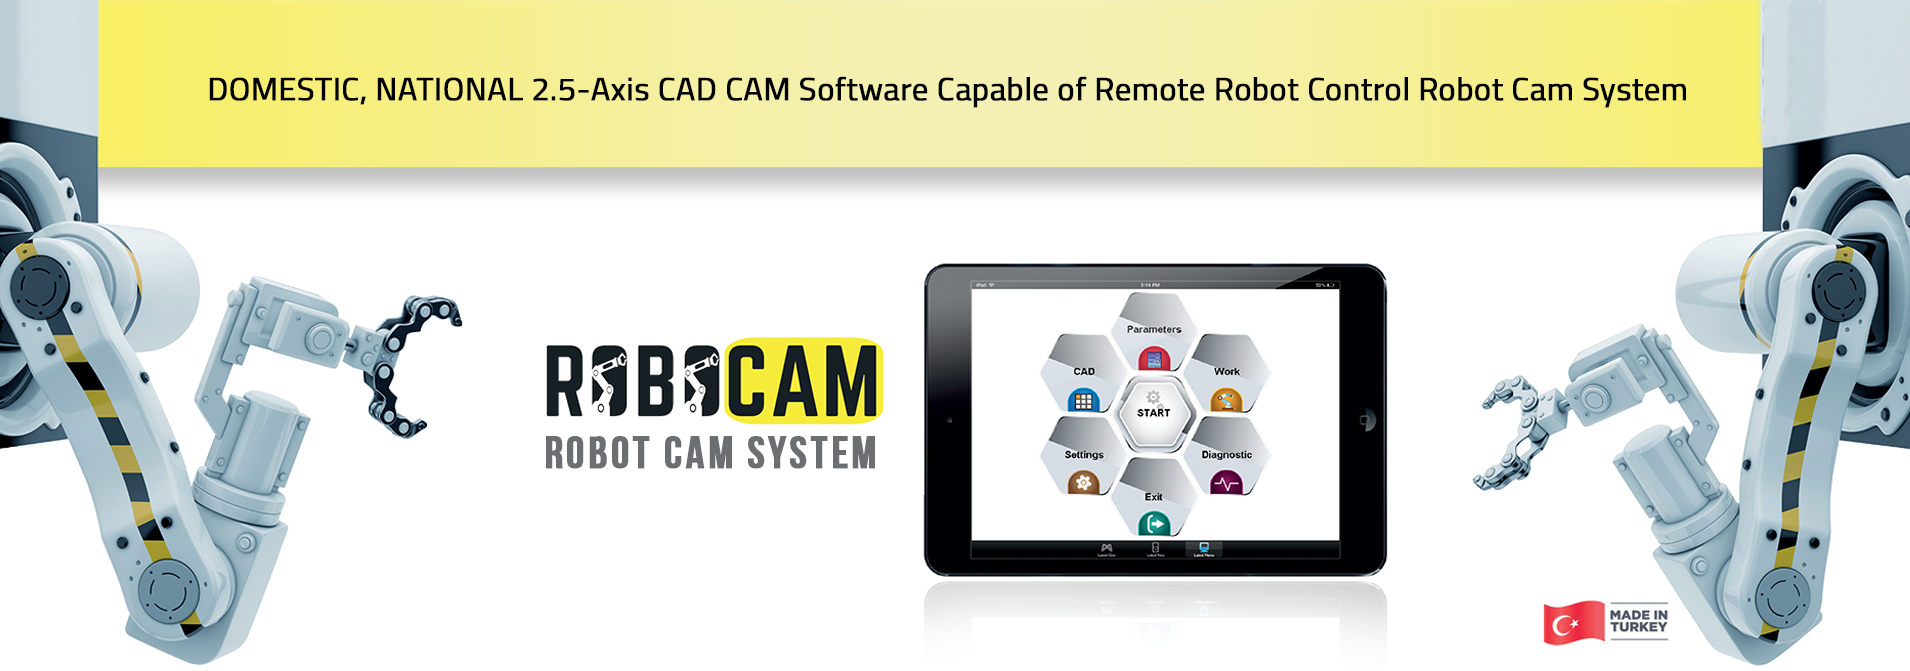 DOMESTIC, NATIONAL 2.5-Axis CAD CAM Software Capable of Remote Robot Control Robot Cam System